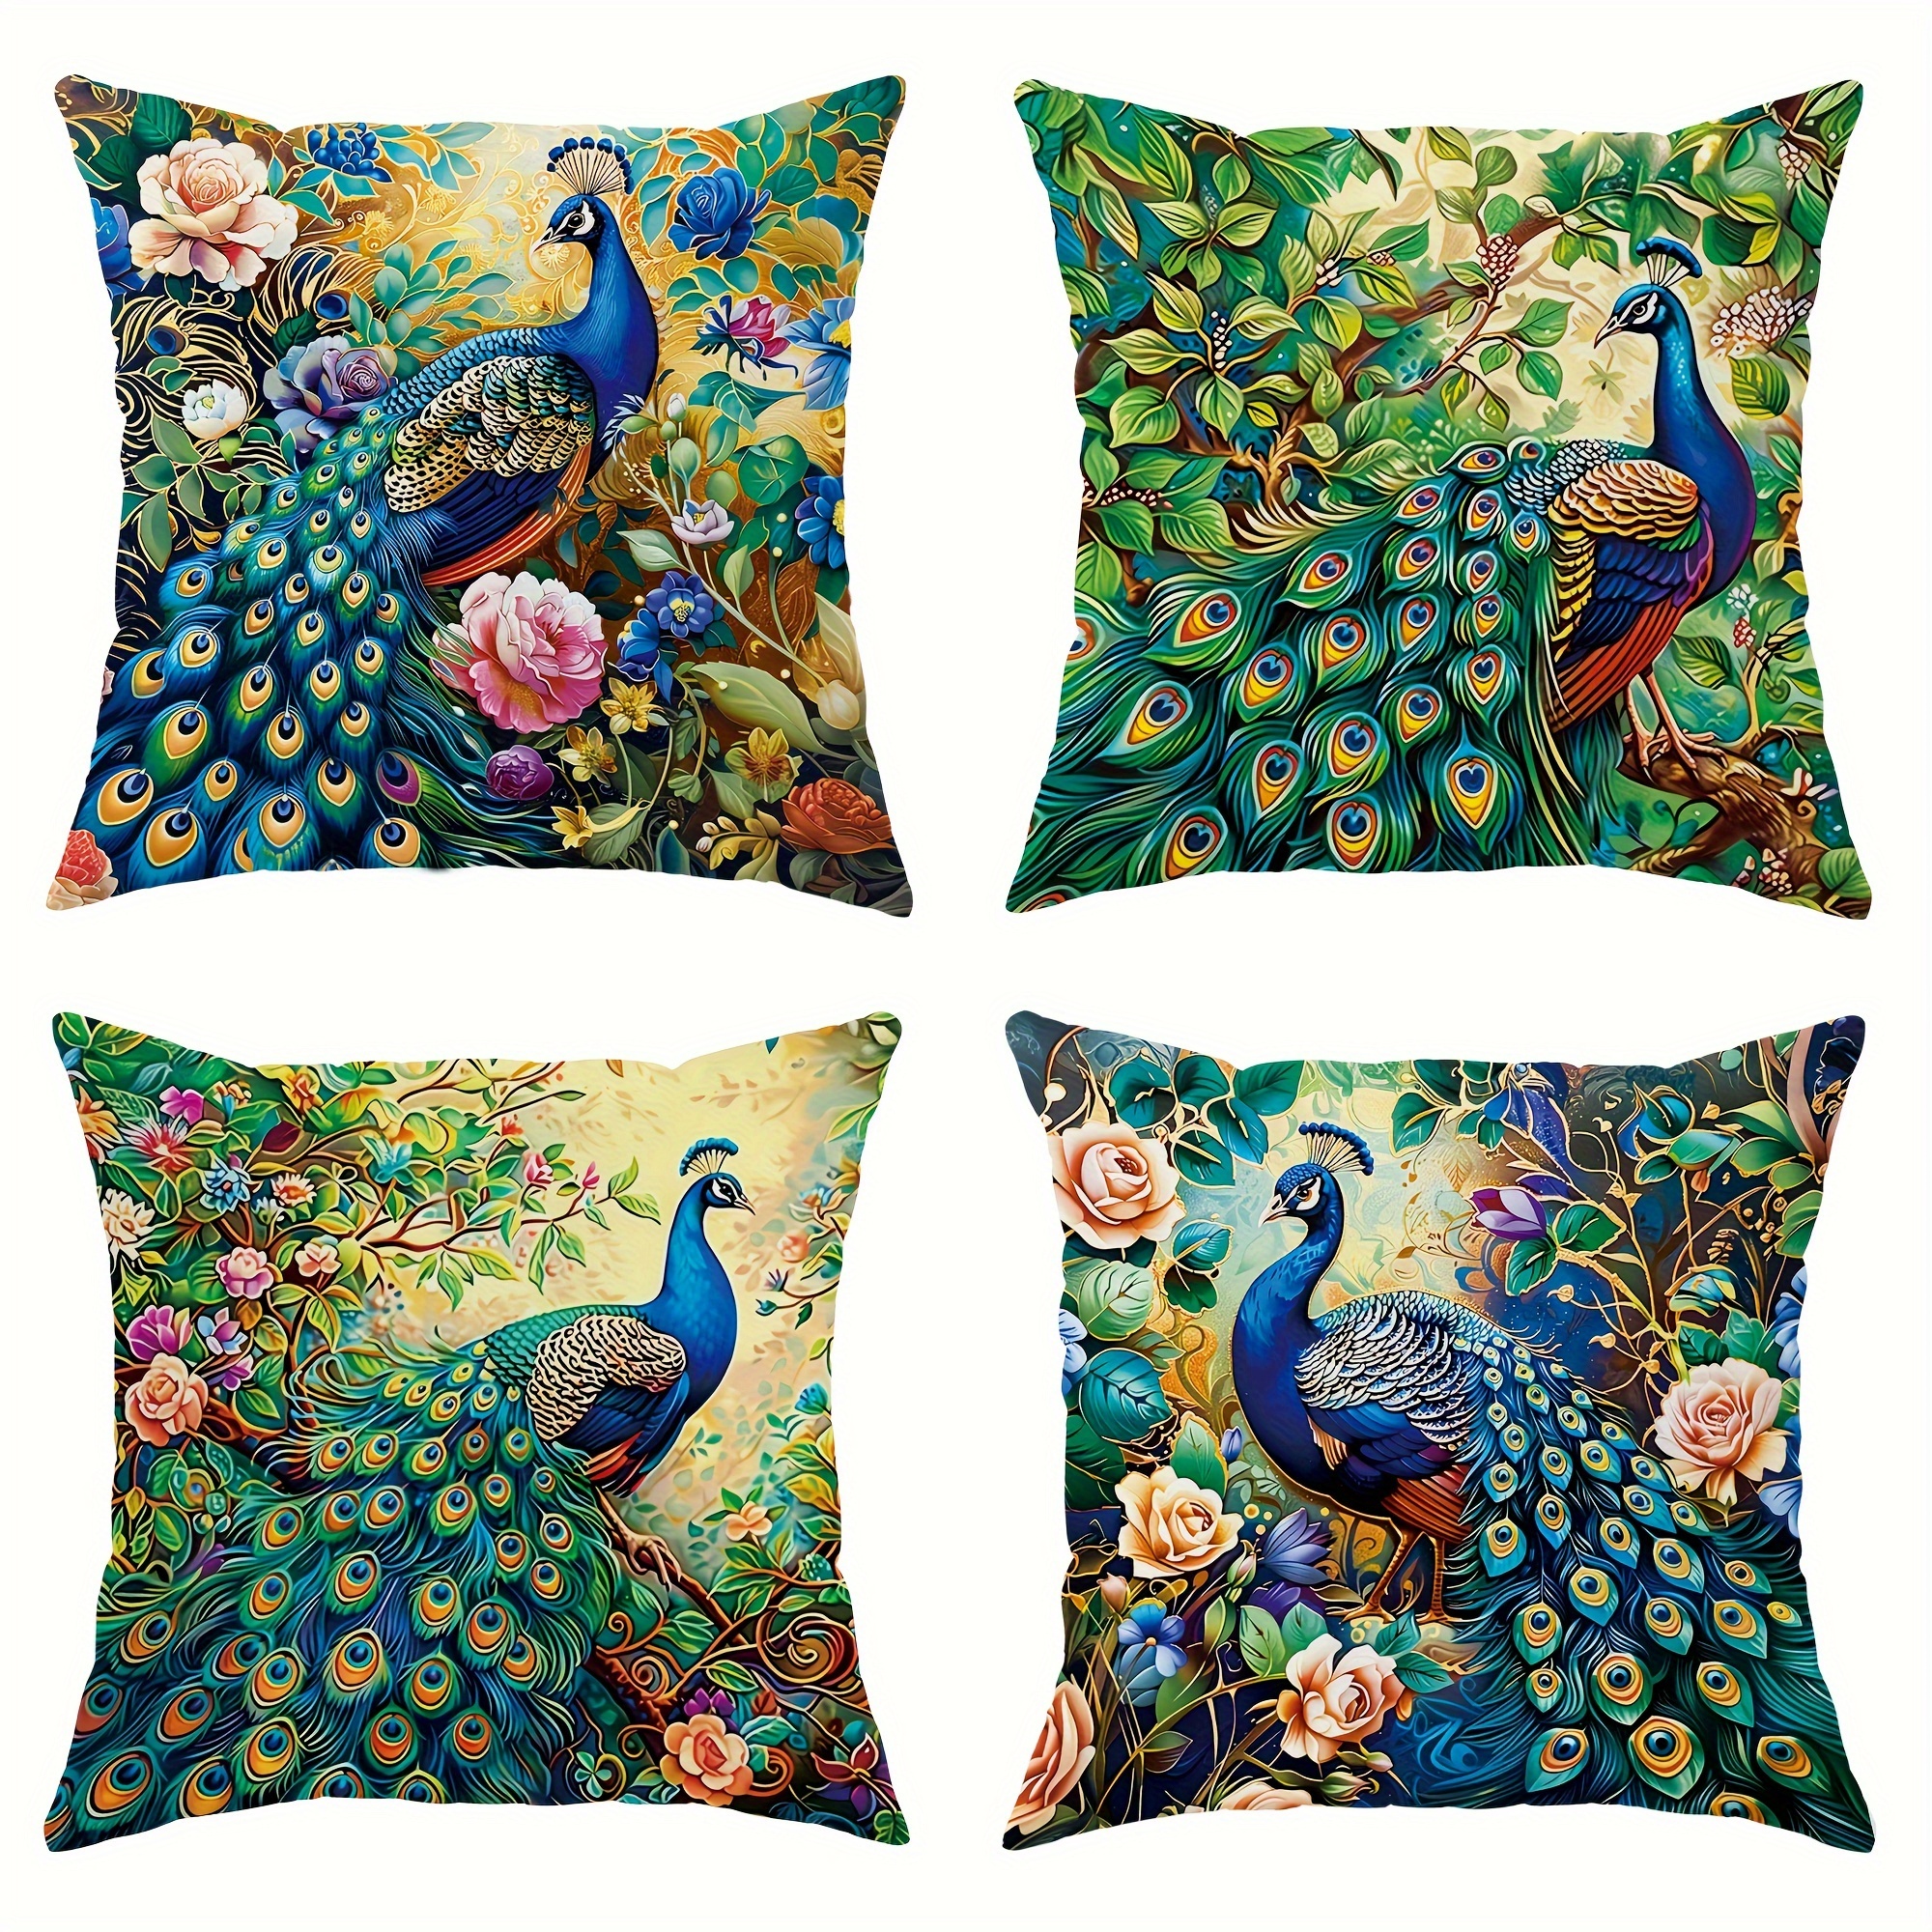 

4pcs, Velvet Throw Pillow Covers Peacock Flower Farmhouse Forest Green Decorative Throw Pillow Covers 18*18 Inch Suitable For Summer And Autumn Living Room Bedroom Sofa Bed Decoration